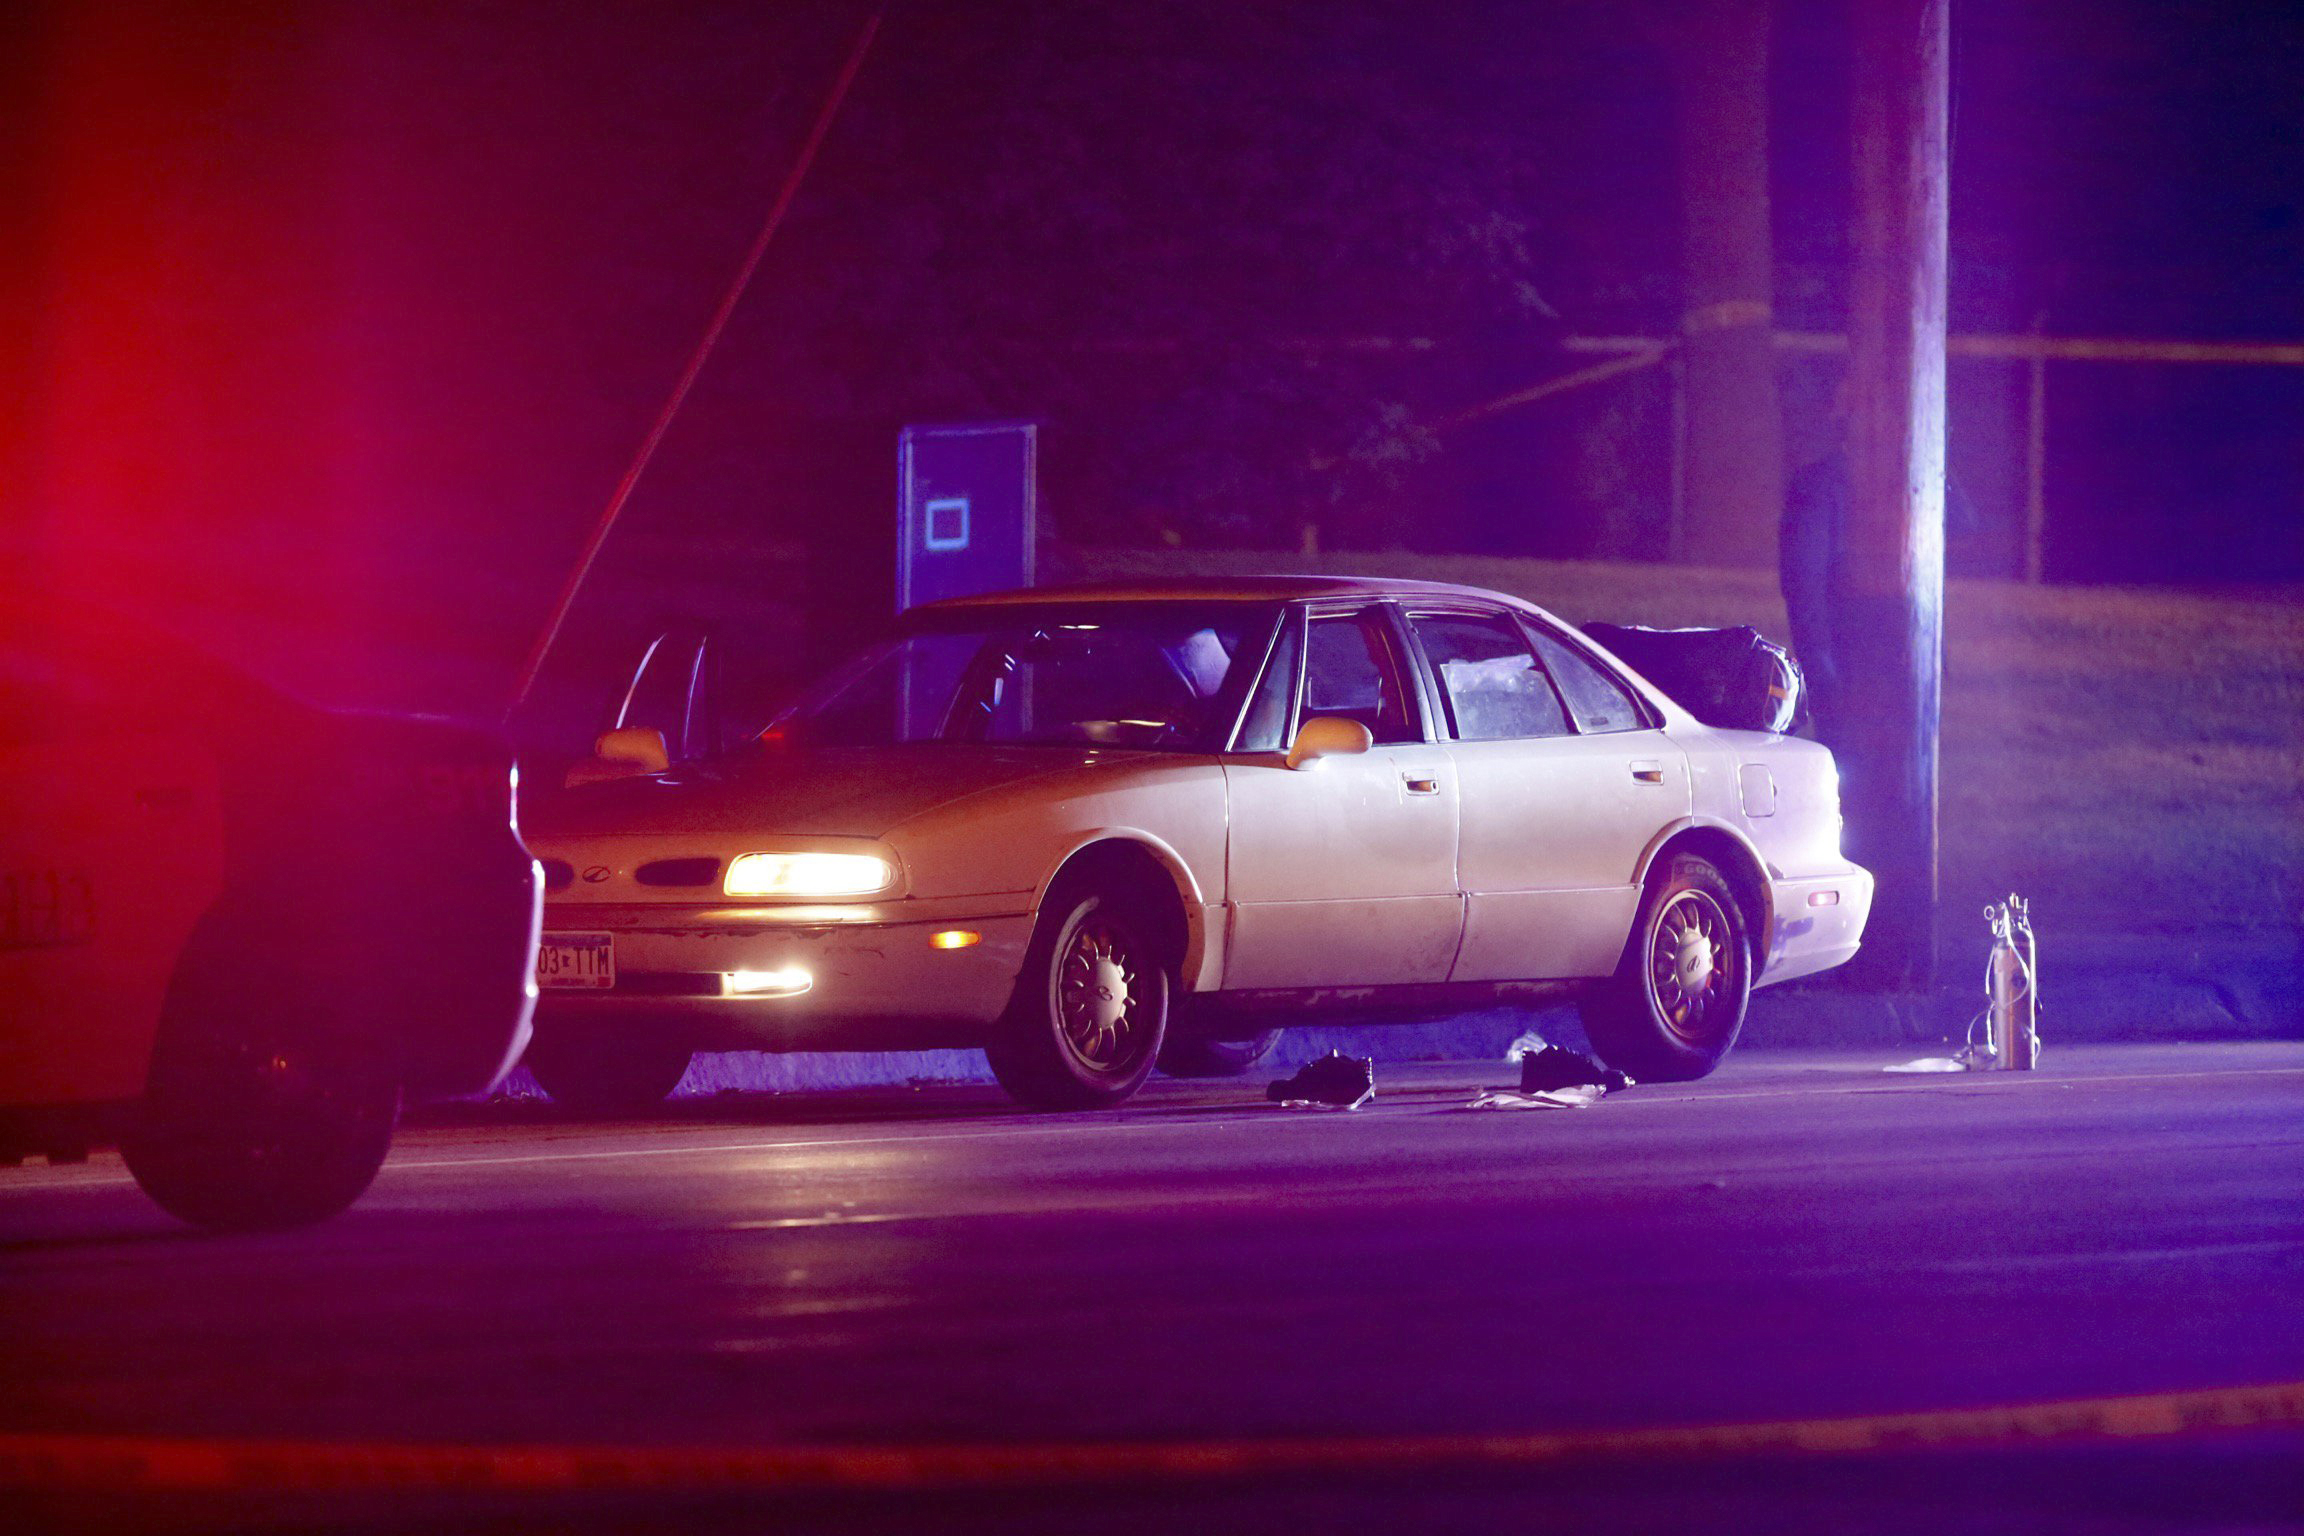 A car at the scene of a shooting of a man involving a St. Anthony Park Police officer in Falcon Heights, Minn., on July 6, 2016.